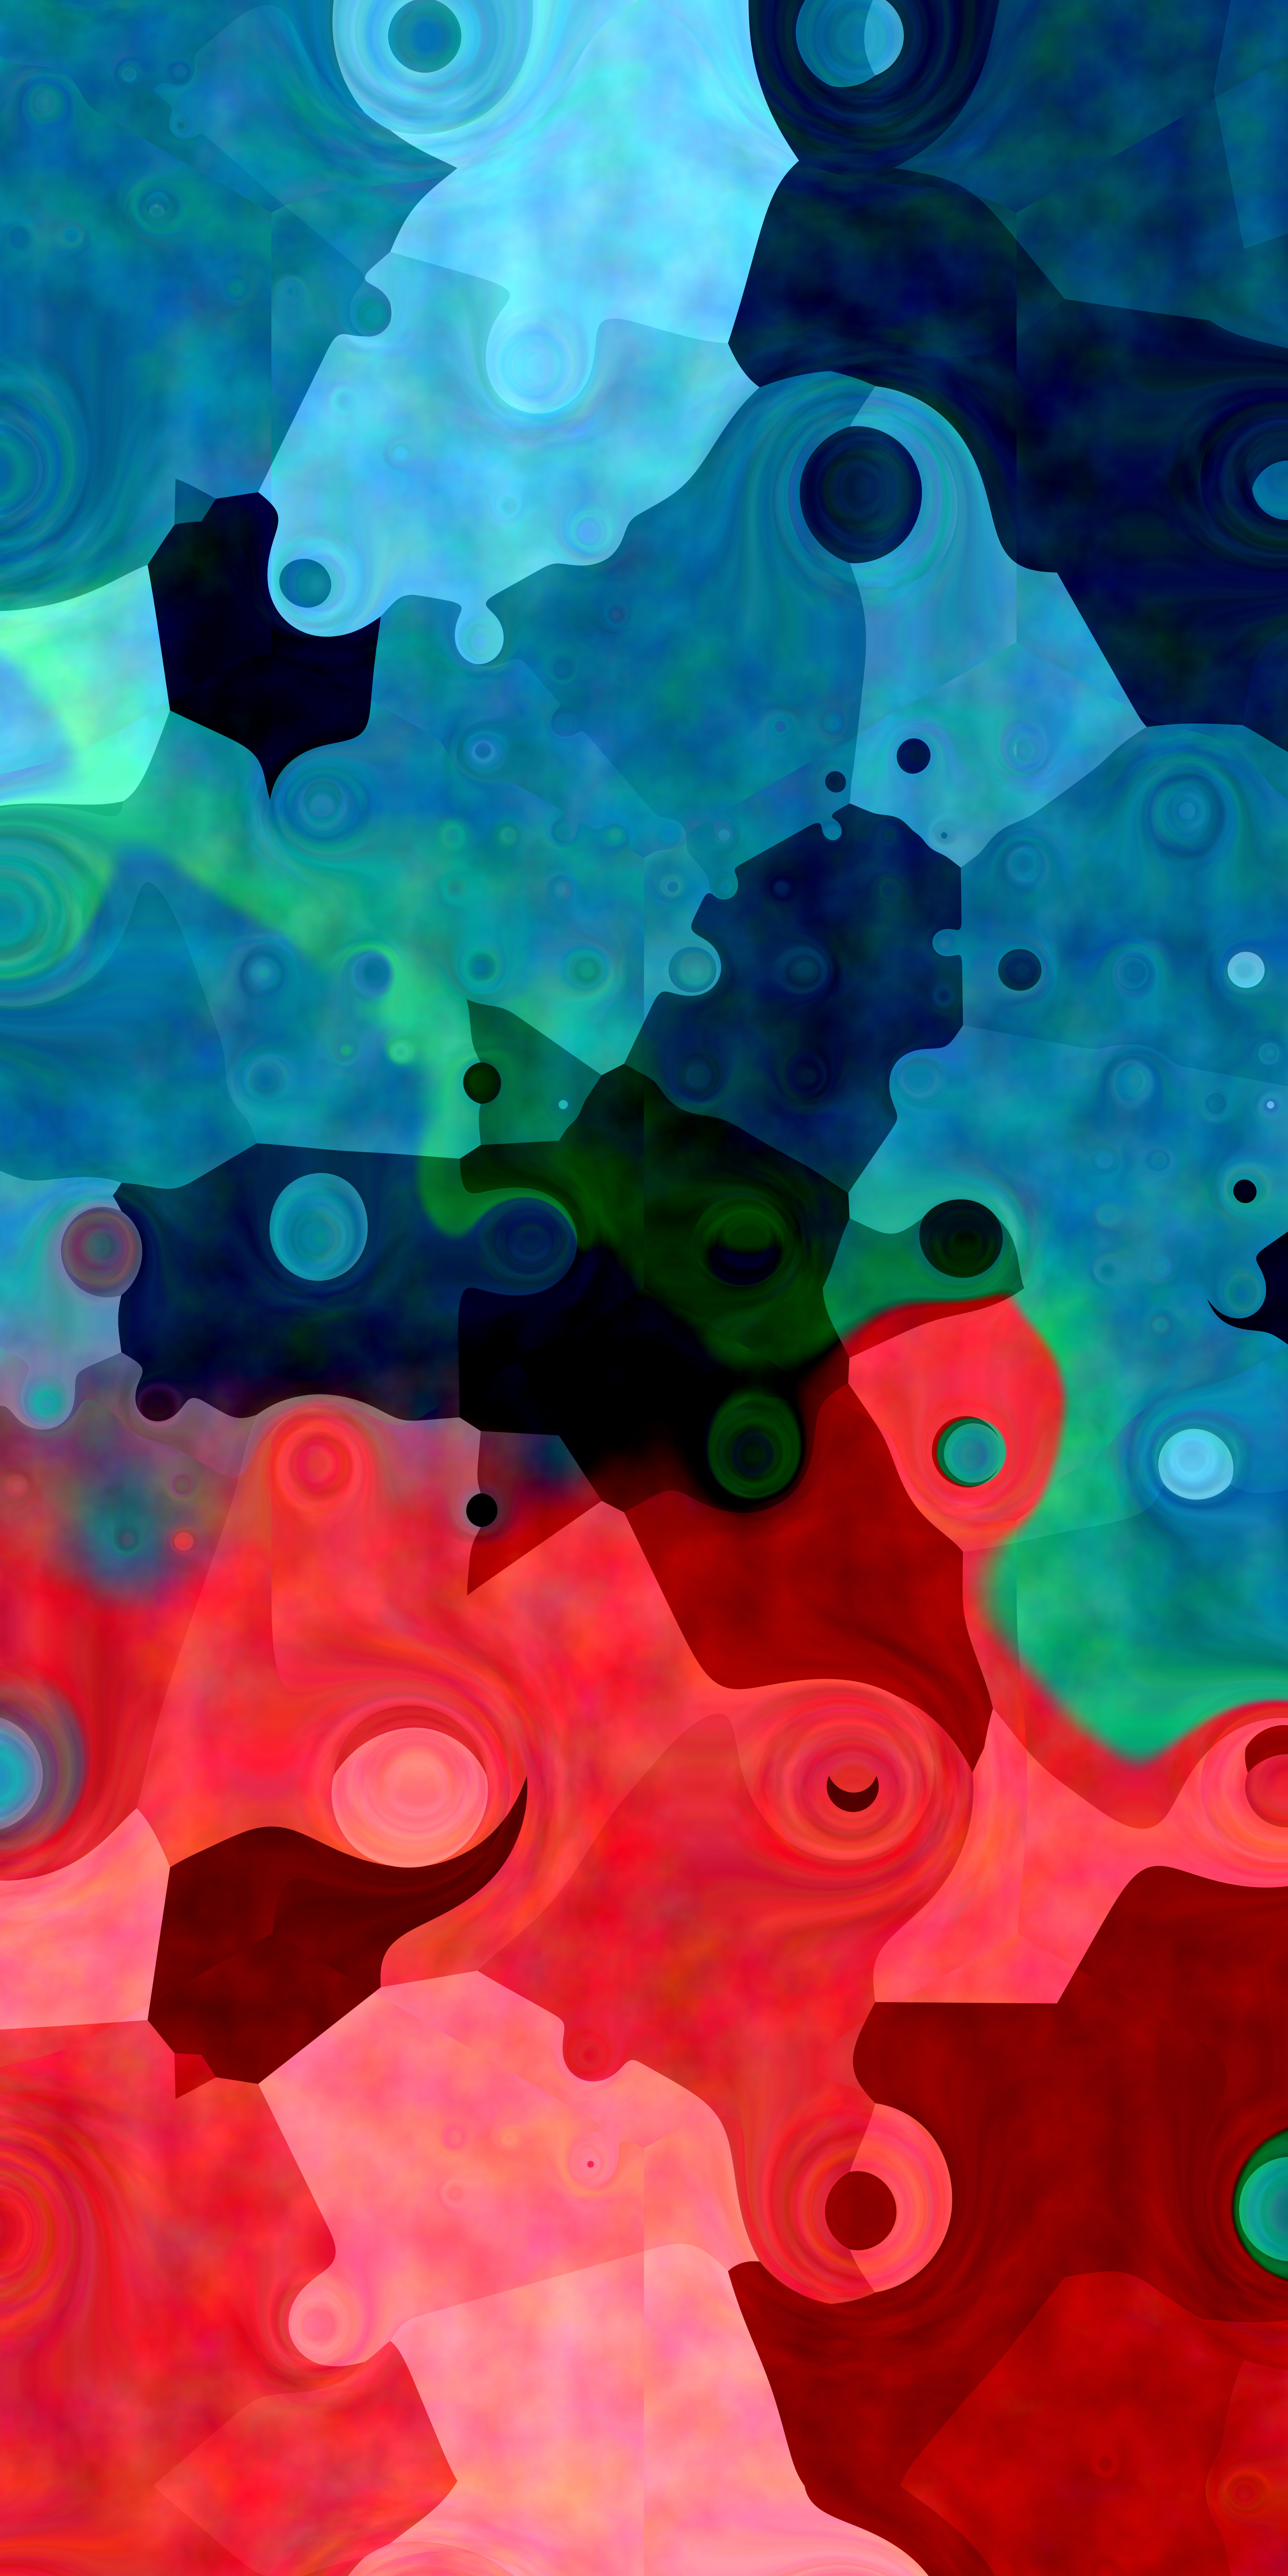 multicolored, stains, digital, abstract, motley, spots Full HD